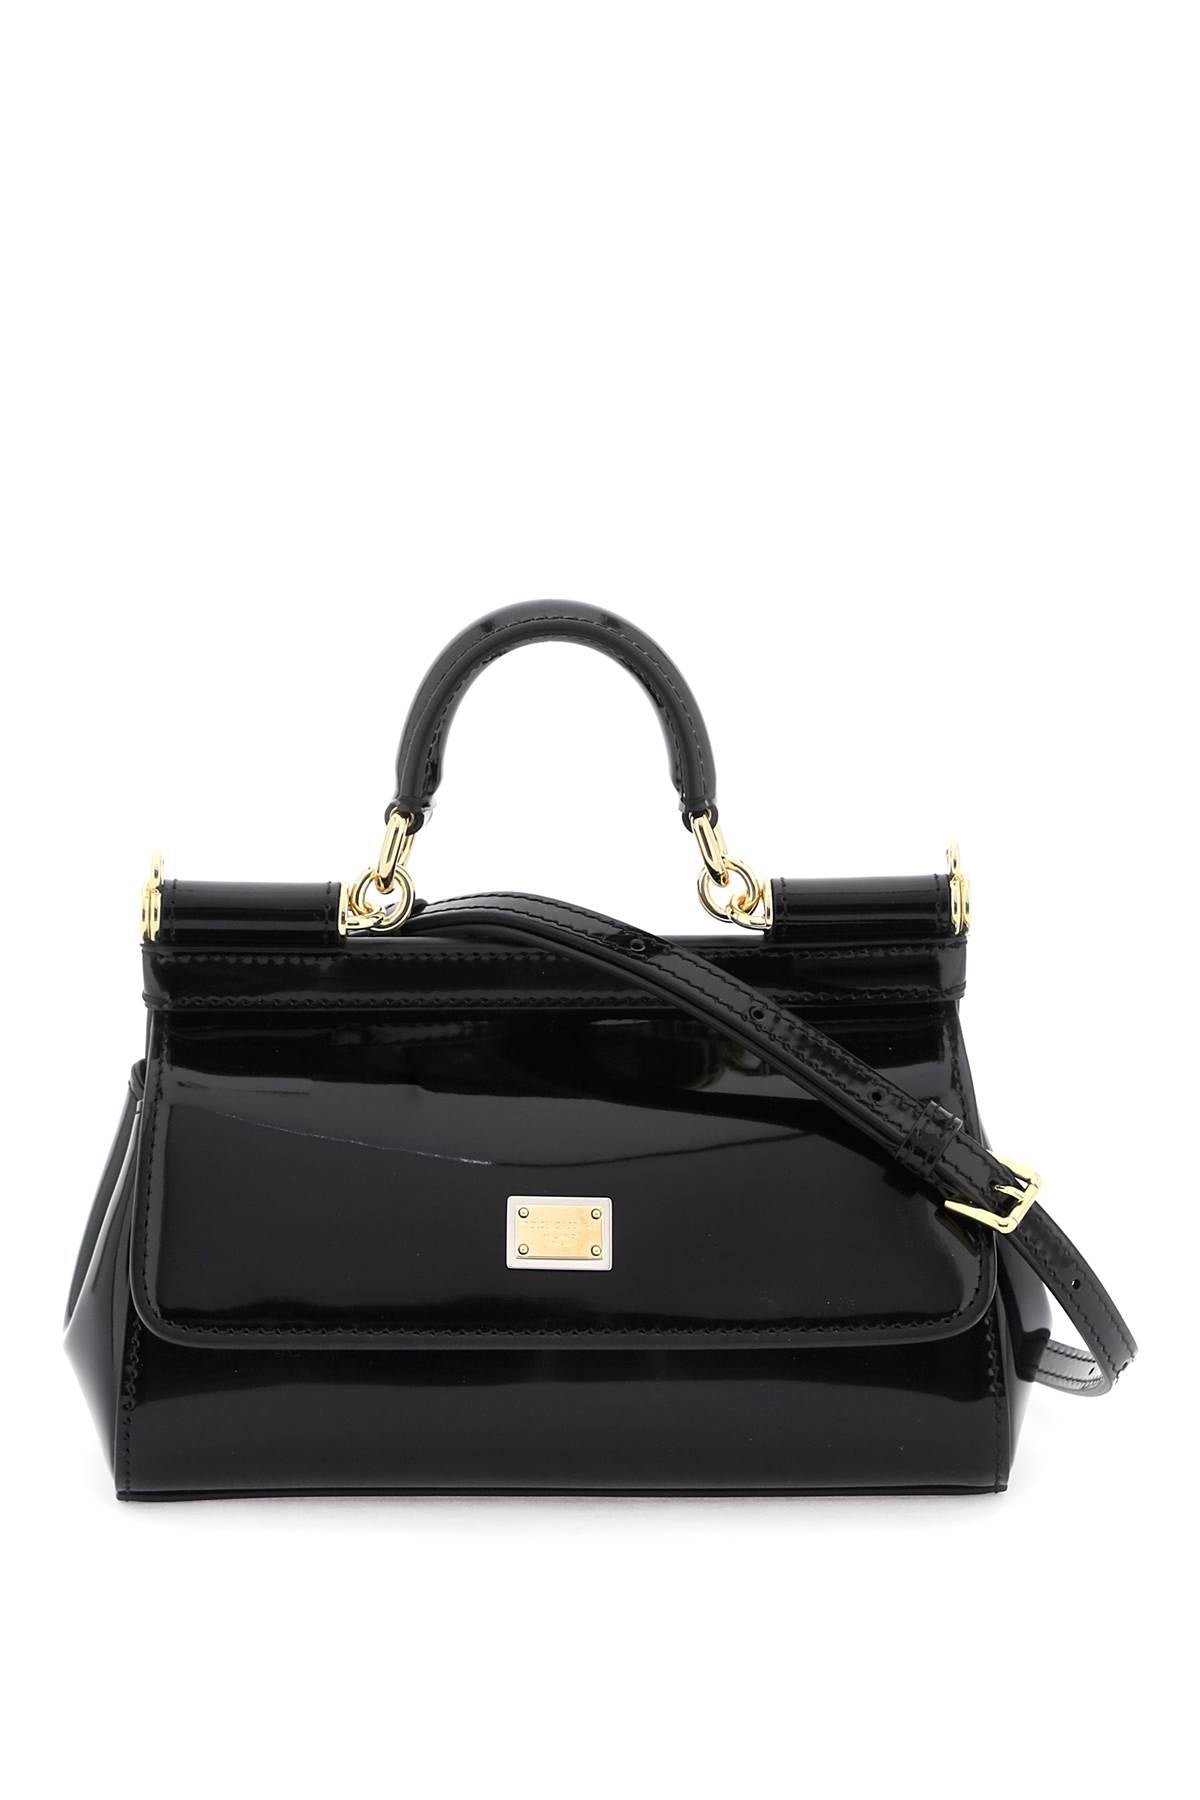 DOLCE & GABBANA Mini Sicily Patent Leather Handbag with Leopard Lining and Adjustable Strap - Black